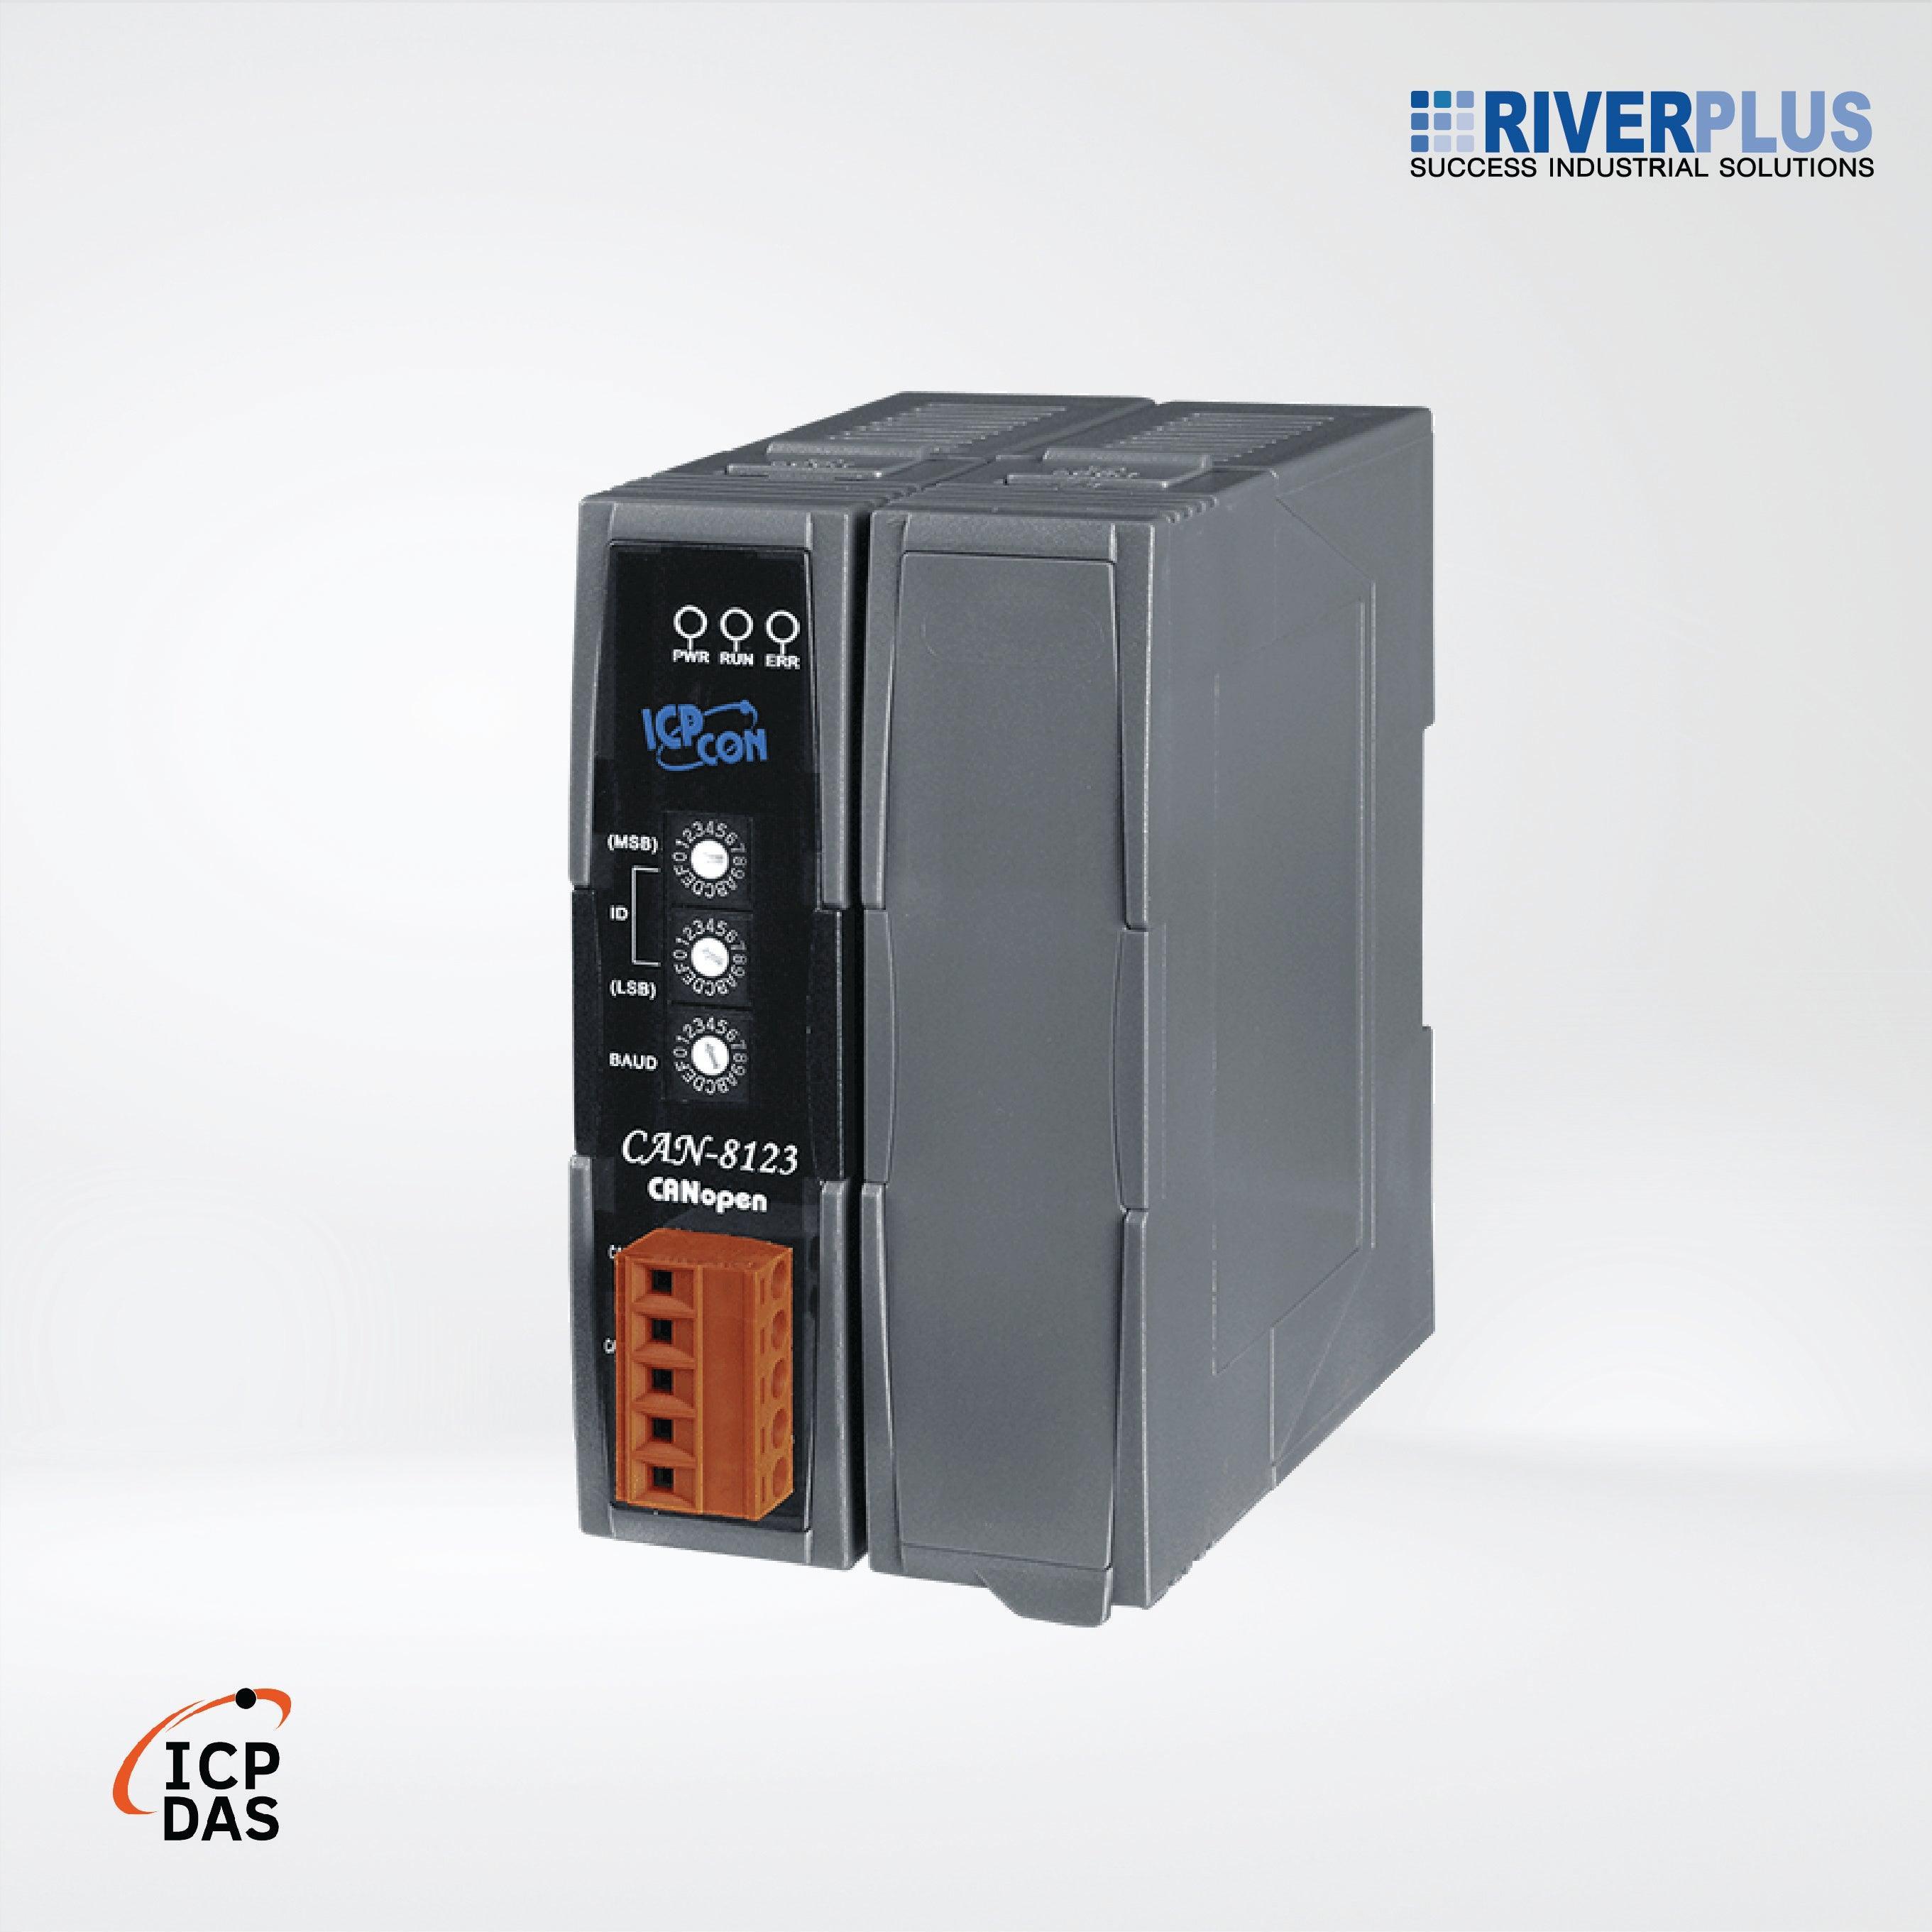 CAN-8123-G CANopen Remote I/O Unit with 1 I/O Slot - Riverplus